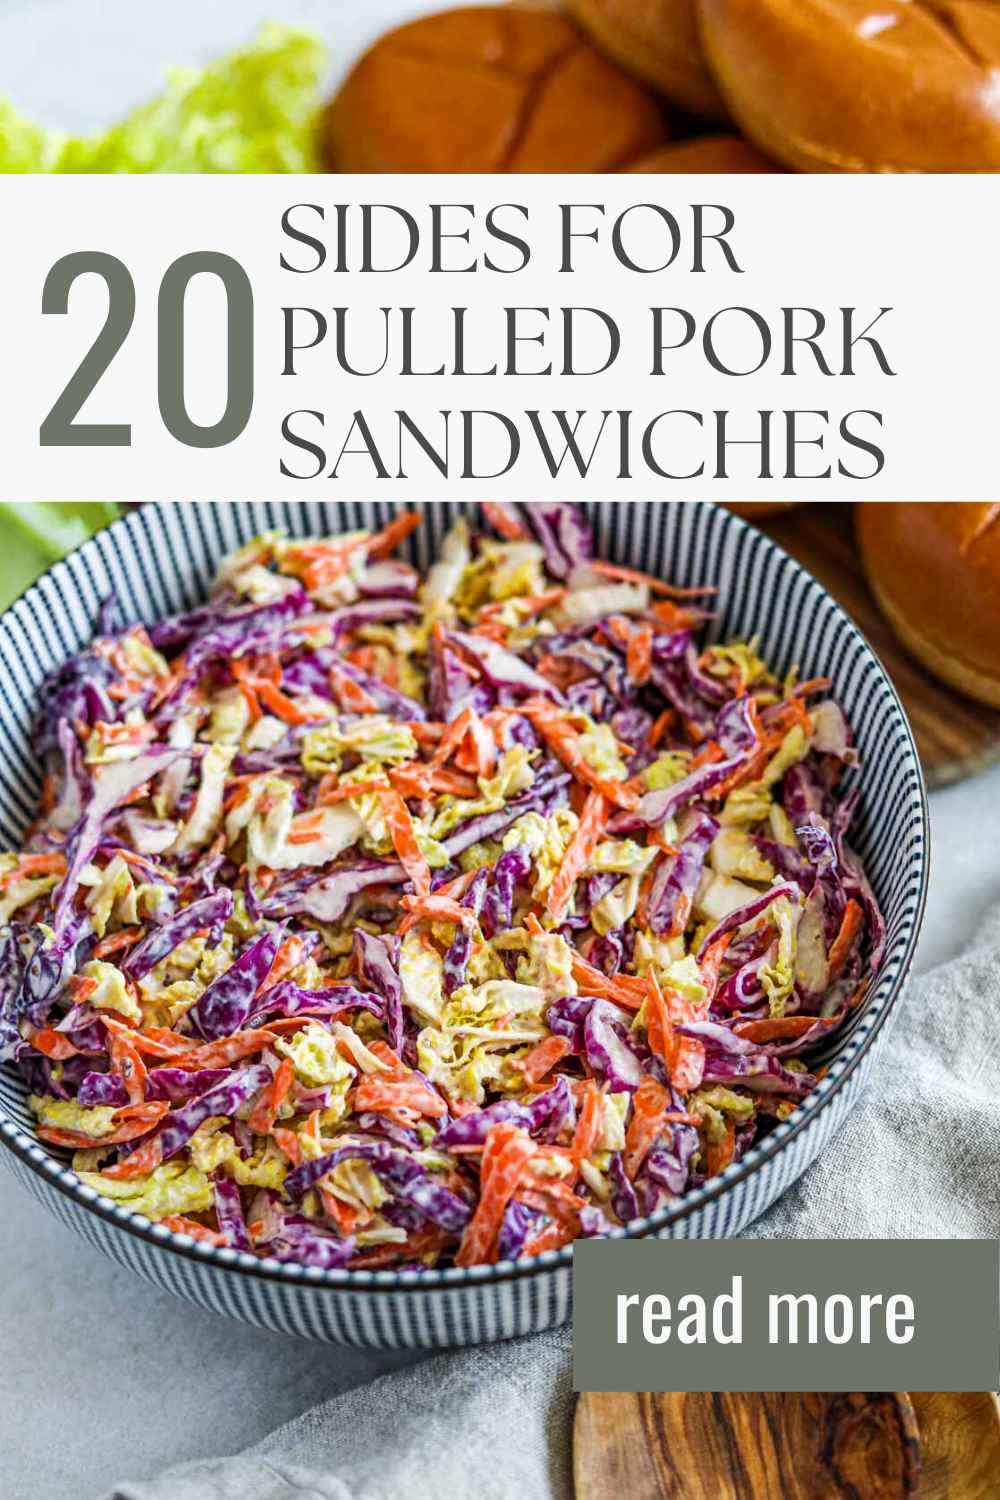 20 side for pulled pork sandwiches Pinterest pin.